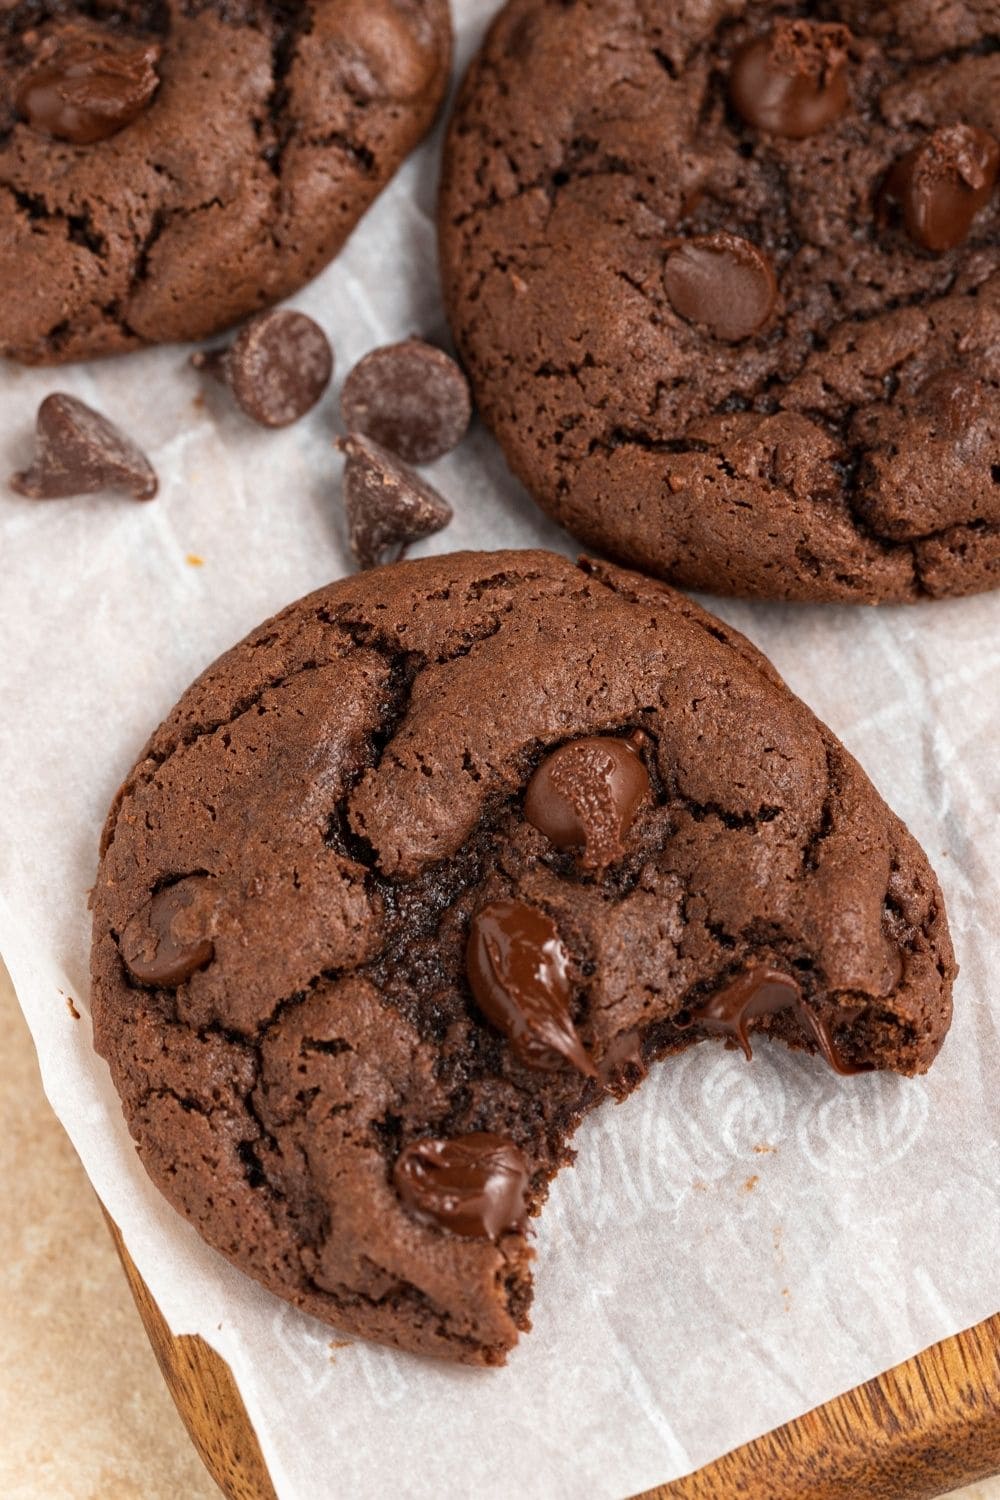 Close Up of Chocolate Cookies with Chocolate Chips- One Has Bite Out of It